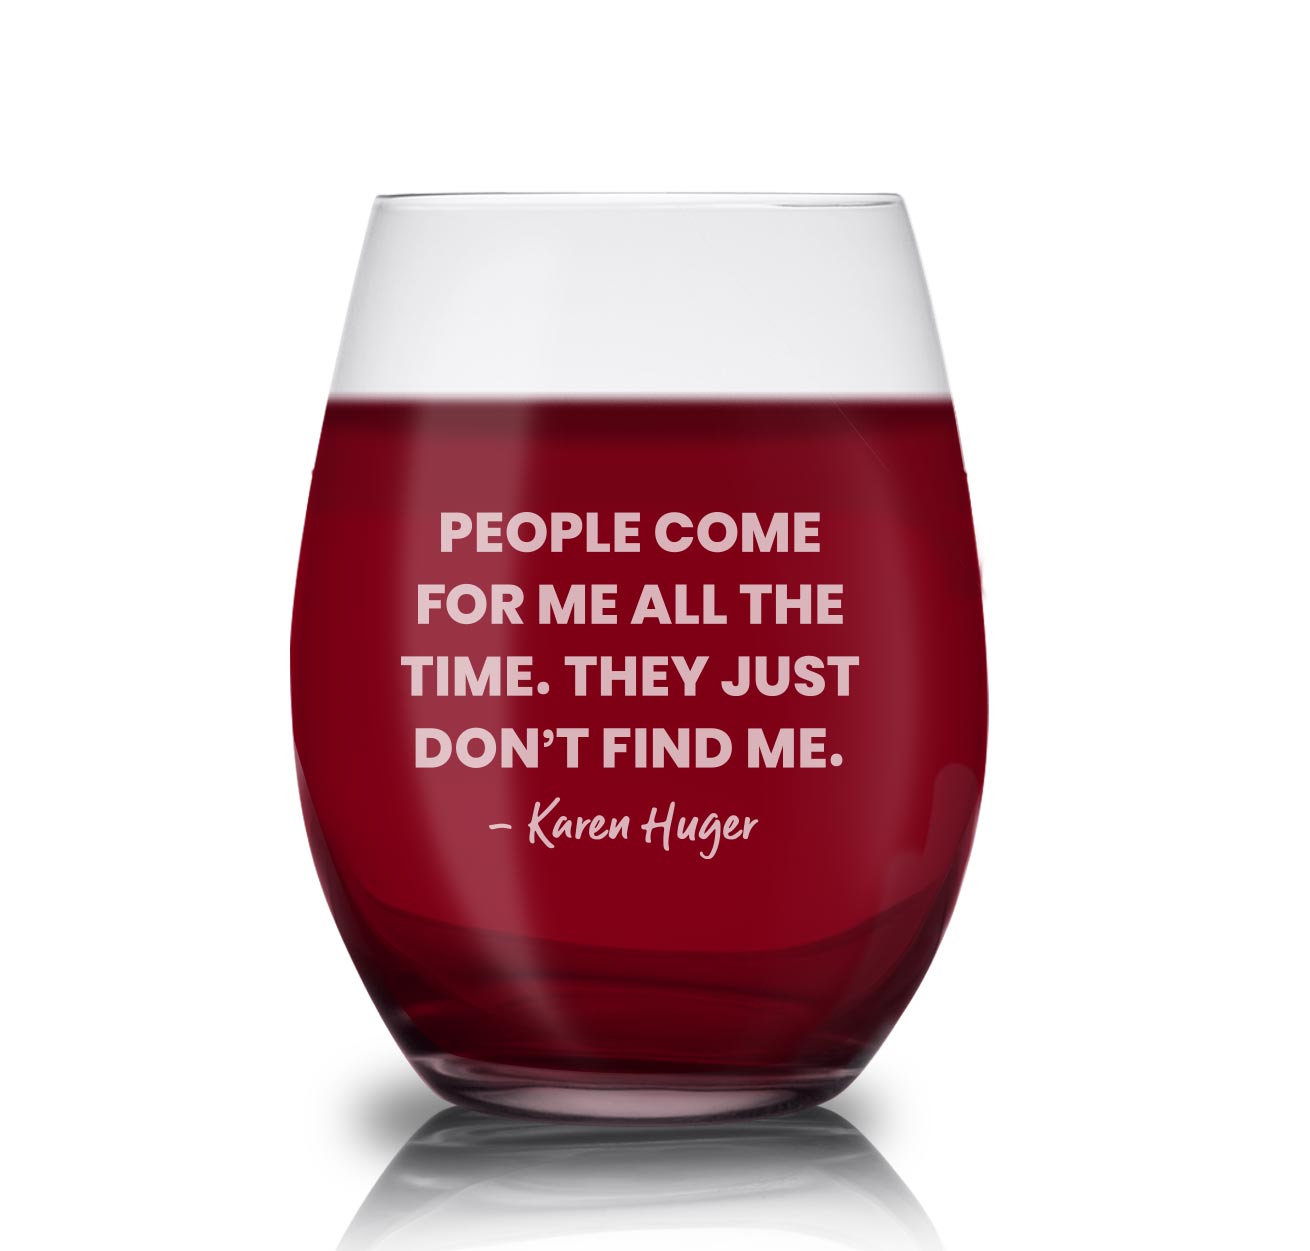 The Real Housewives of Potomac They Just Don't Find Me Karen Huger Laser Engraved Stemless Wine Glass - Set of 2